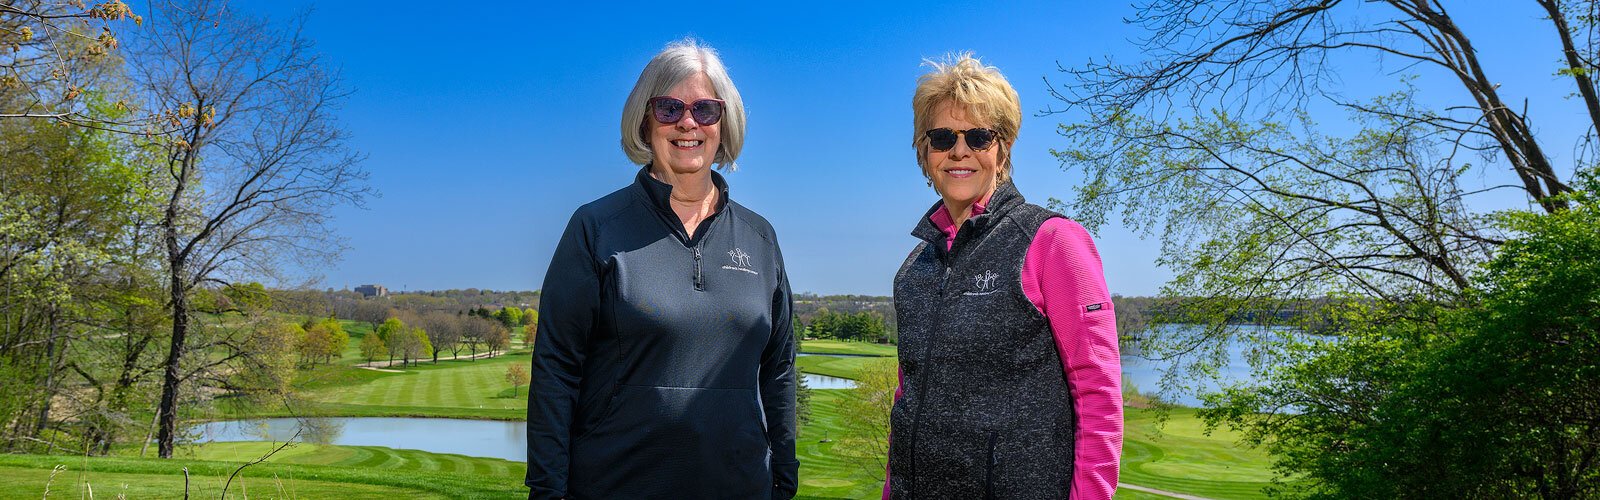 Lorrie Beaumont and Julie Piazza at the future location of the Children's Healing Center bordering Eagle Crest Golf Club